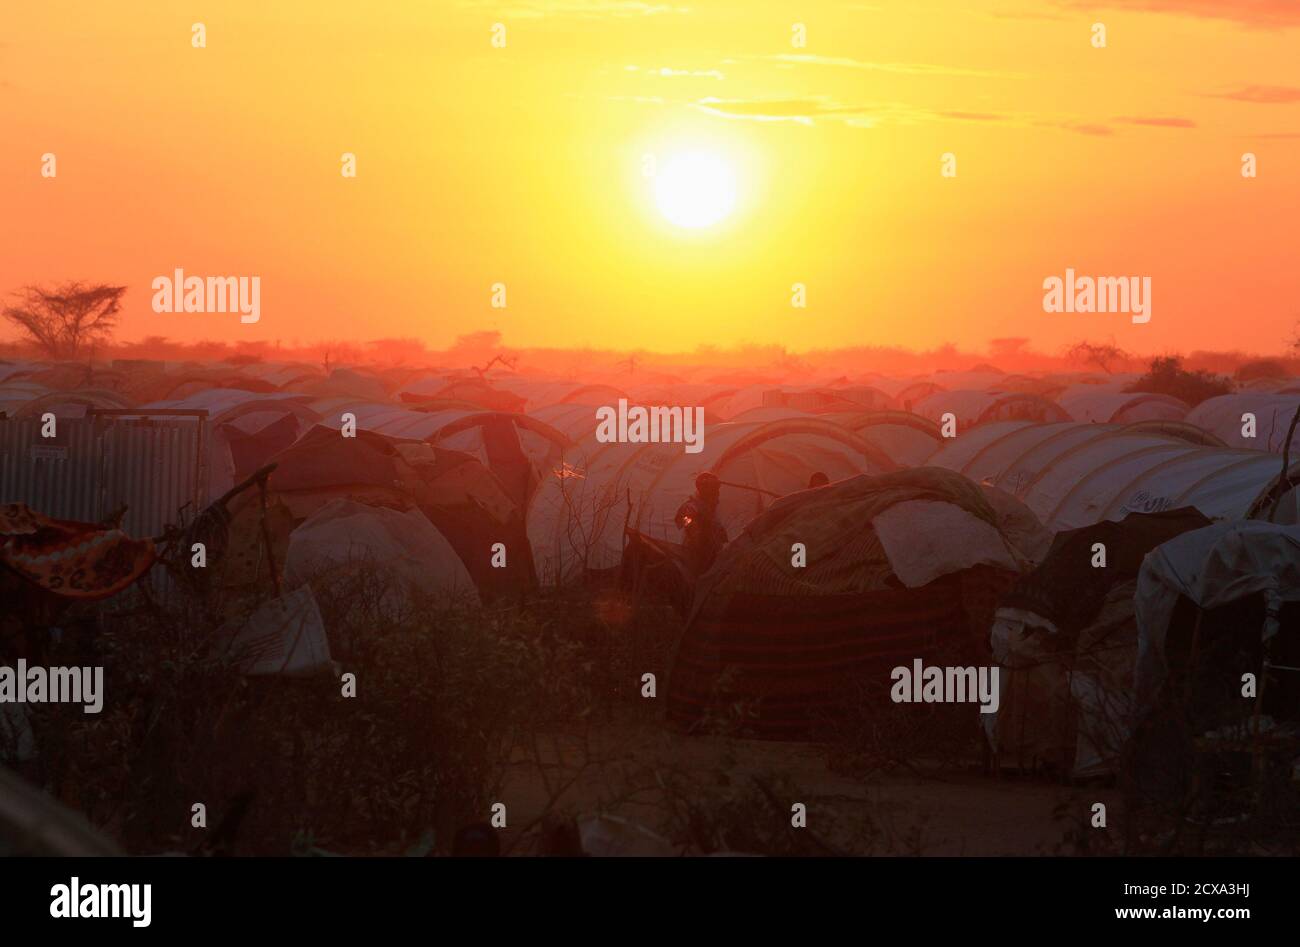 The sun sets over the Ifo extension refugee camp in Dadaab, near the Kenya-Somalia border, July 31, 2011. The whole of drought- and conflict-wracked southern Somalia is heading into famine as the Horn of Africa food crisis deepens, the United Nations said. REUTERS/Thomas Mukoya (KENYA - Tags: SOCIETY CIVIL UNREST DISASTER ENVIRONMENT) Stock Photo